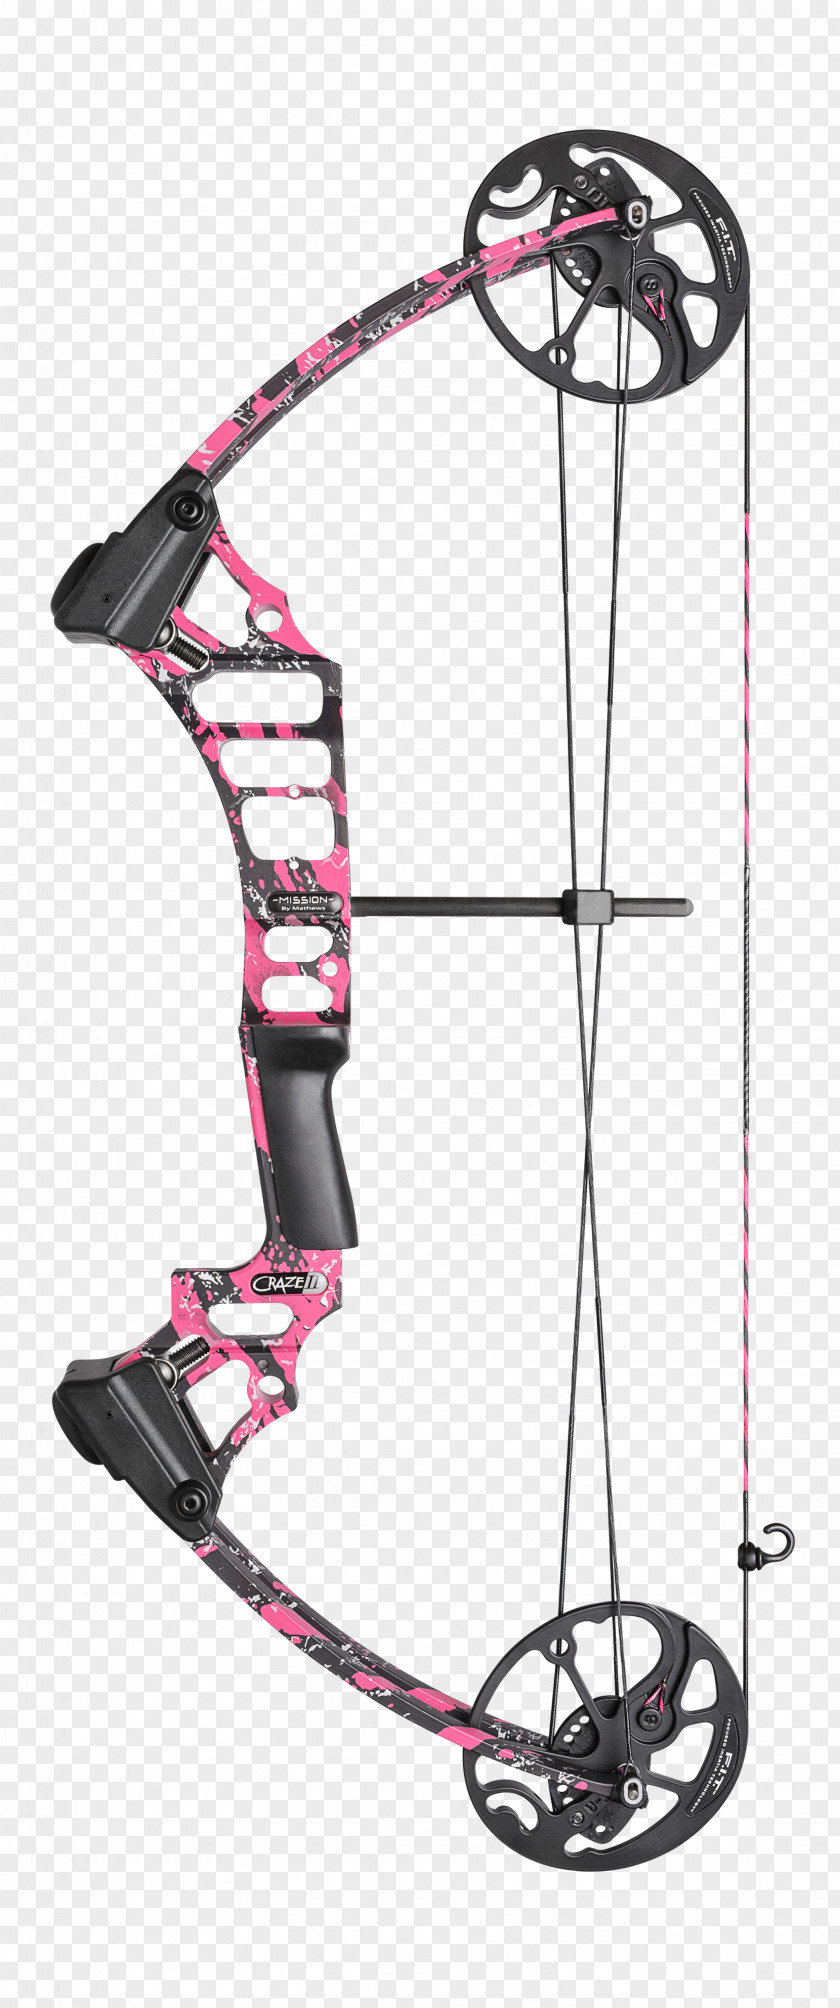 Compound Bows Archery Bow And Arrow Bowhunting PNG